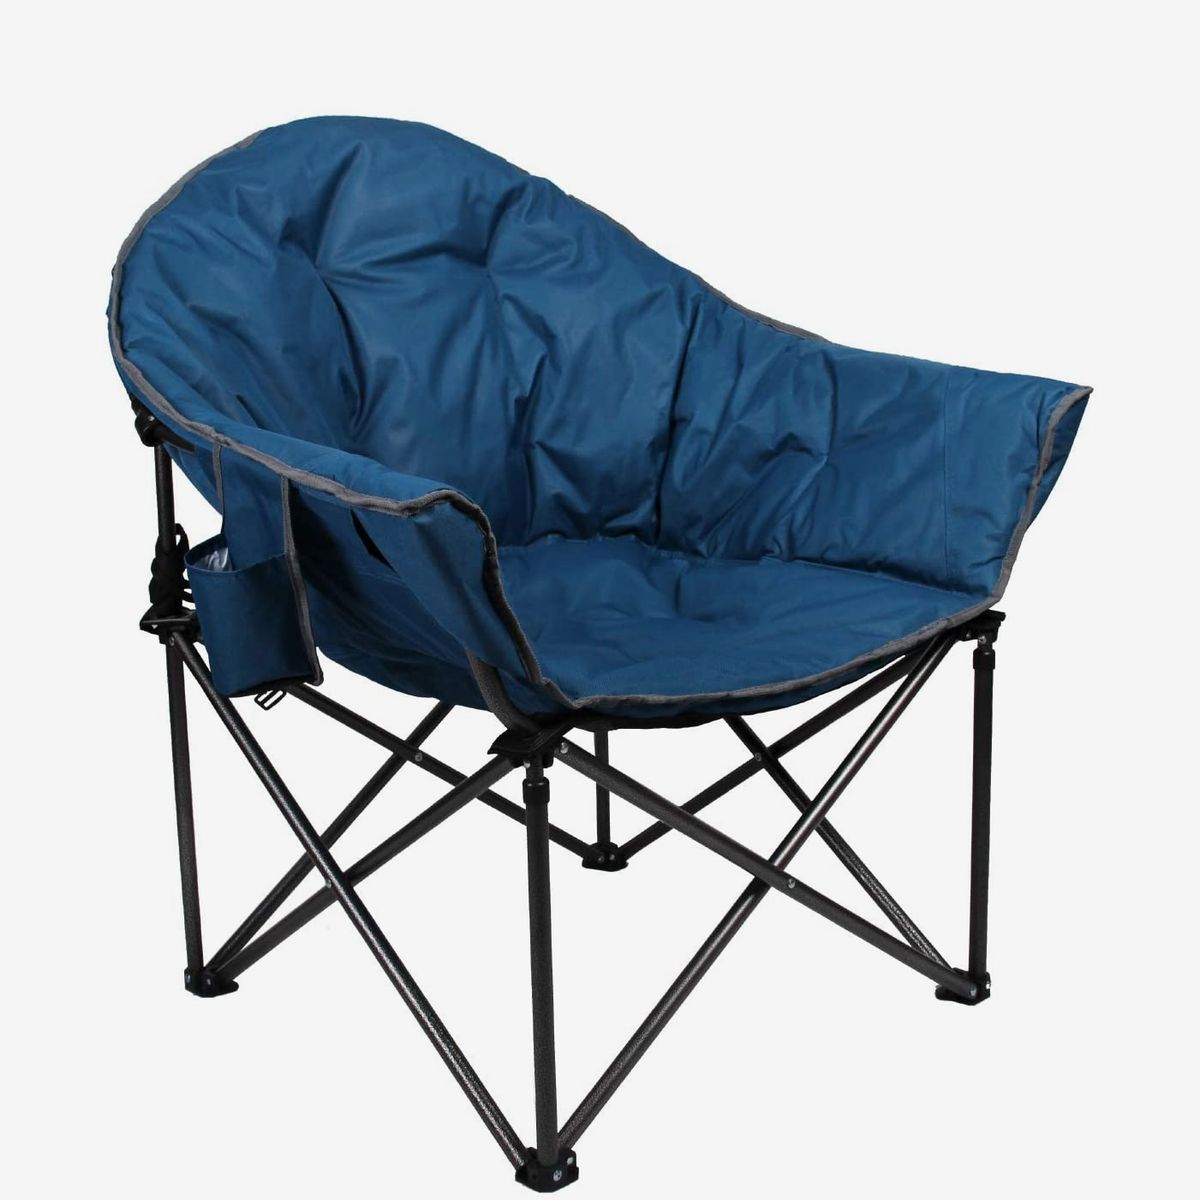 16 Best Camping Chairs 2021 The, Best Portable Chair With Canopy